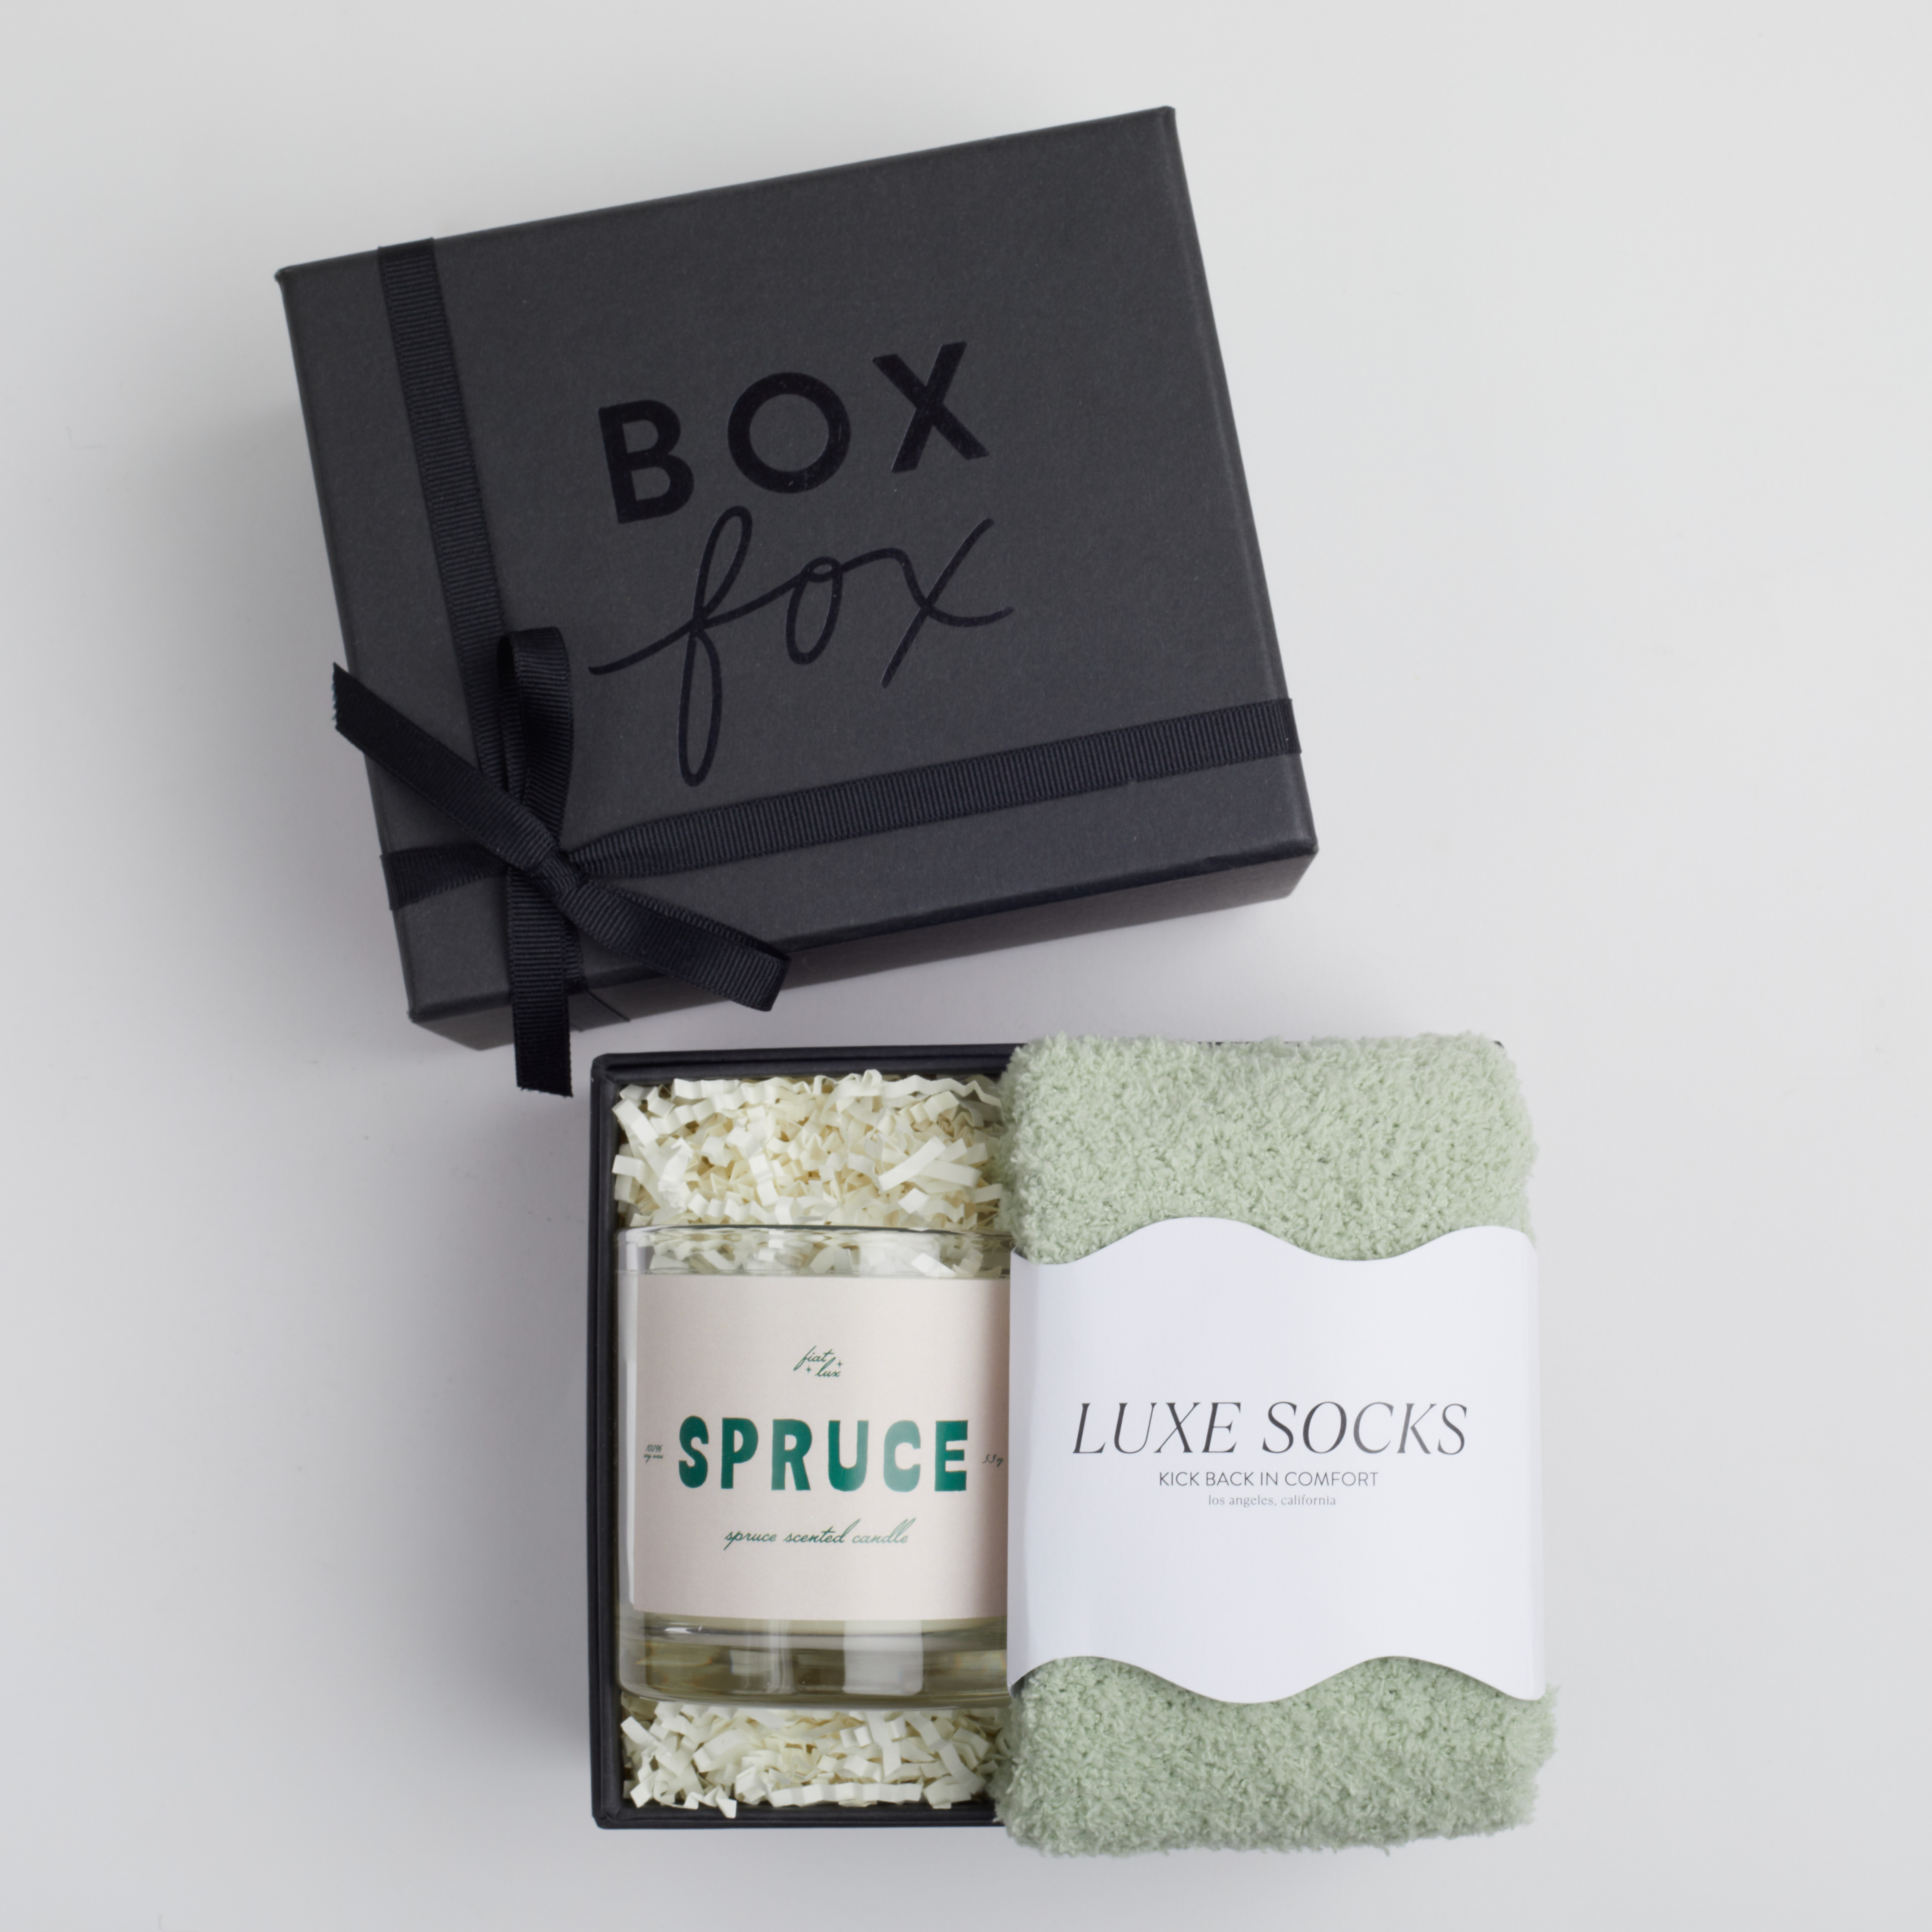 BOXFOX mini black box packed spruce candle and luxe green cozy socks